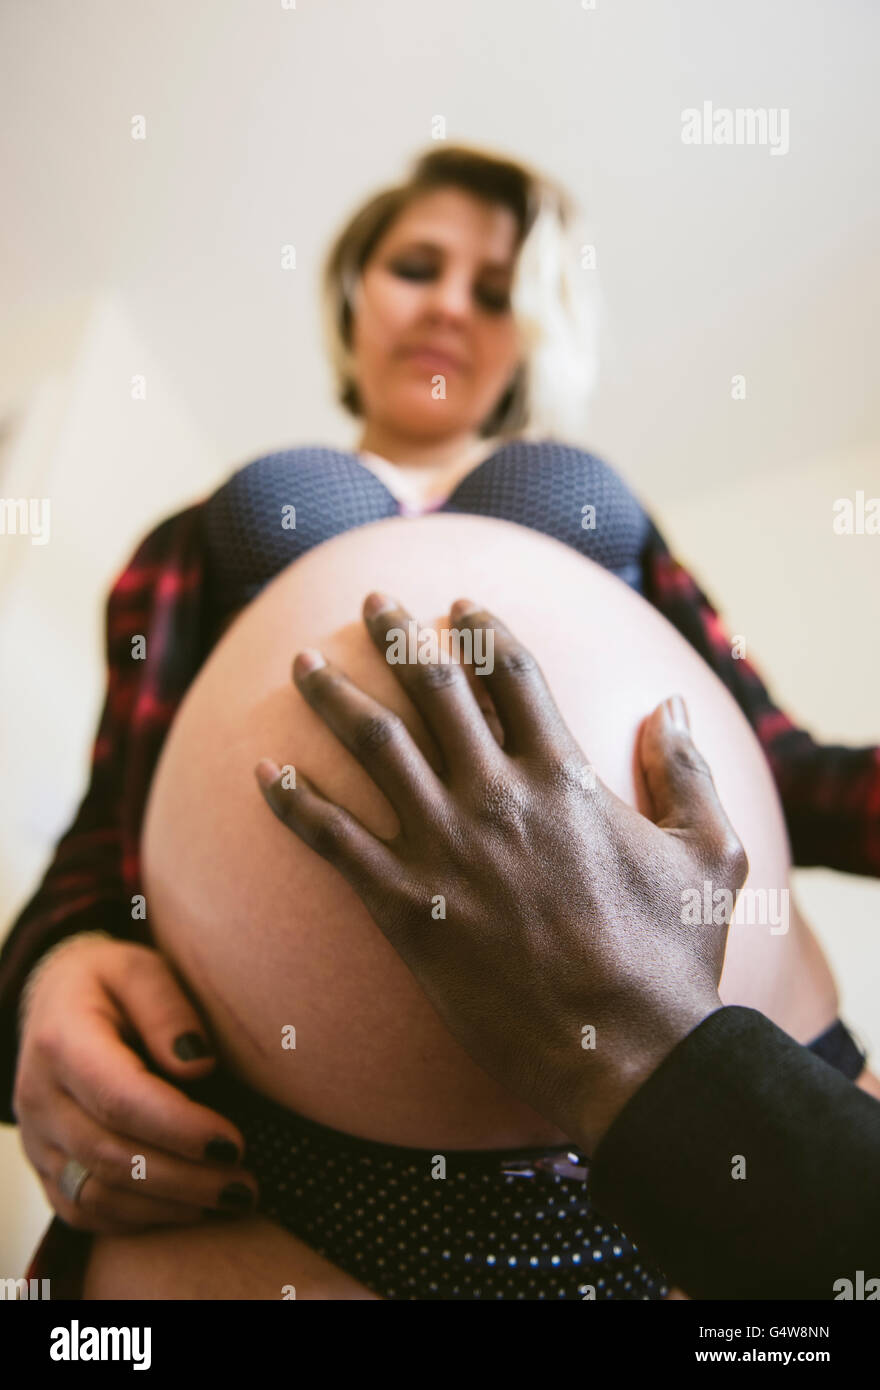 Dad's hand over the baby bump; expectant parents. Stock Photo